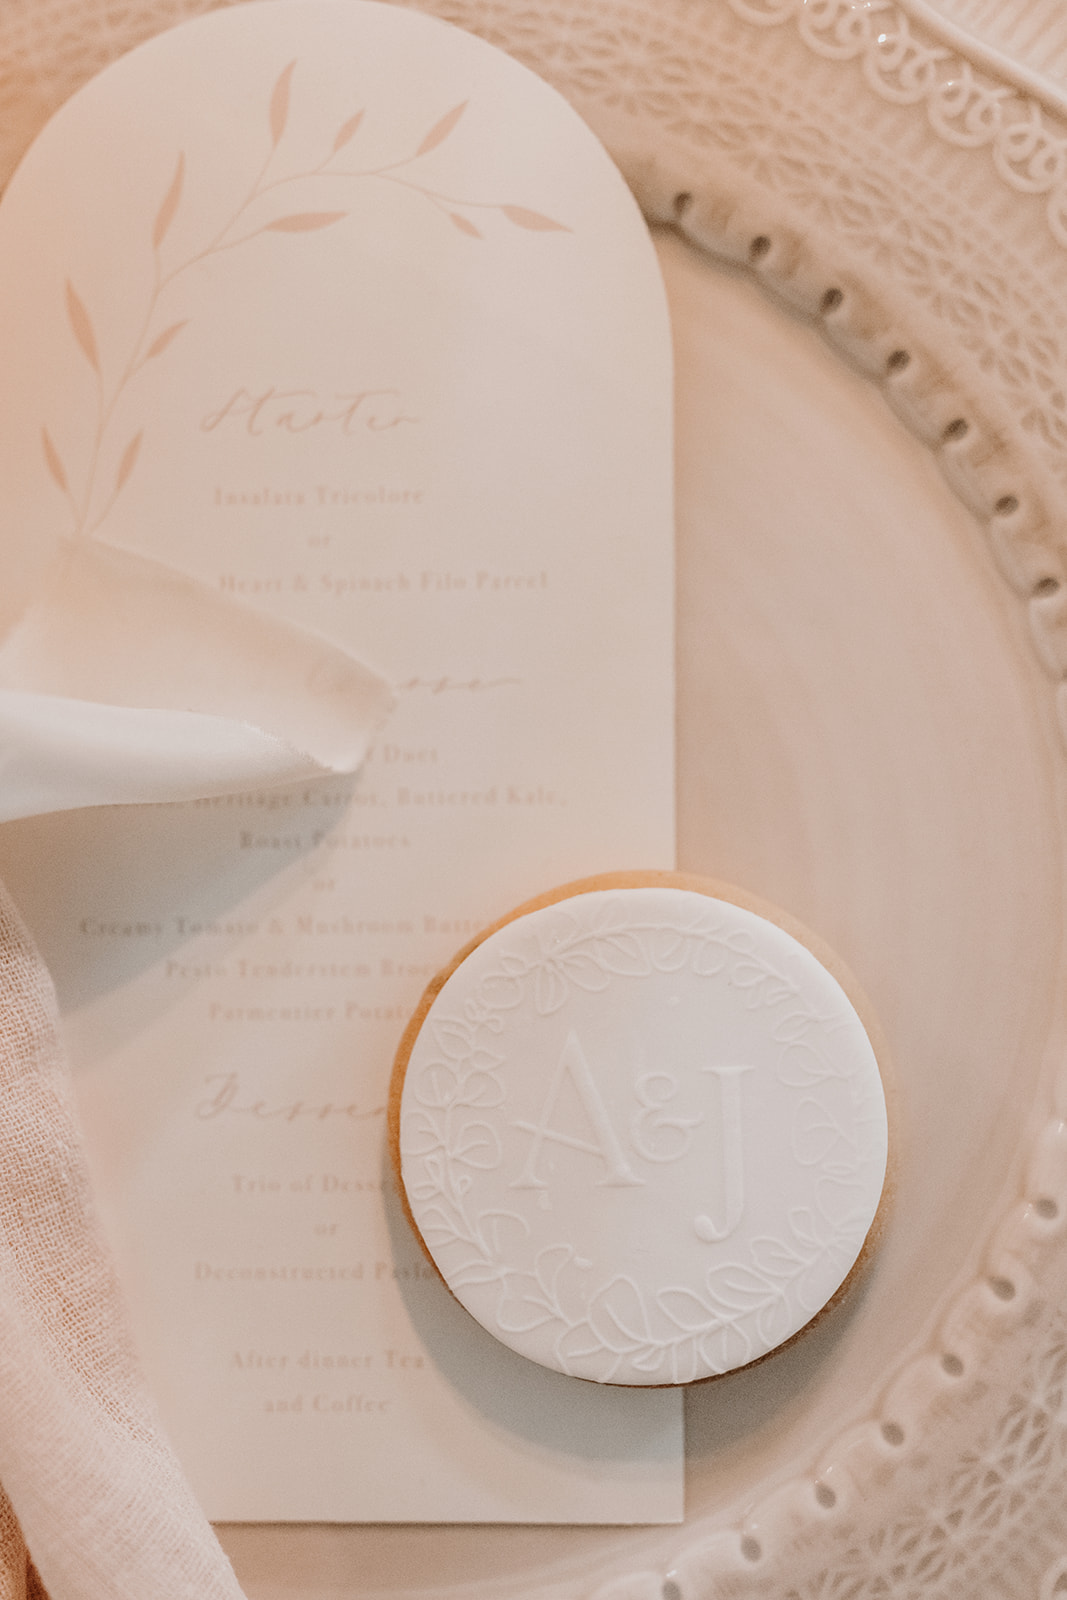 Spring wedding at Cowdray Park | Elegant sugar biscuit favours with elegant stationery | Louise Hayes Cake Design | Melissa Megan Photography